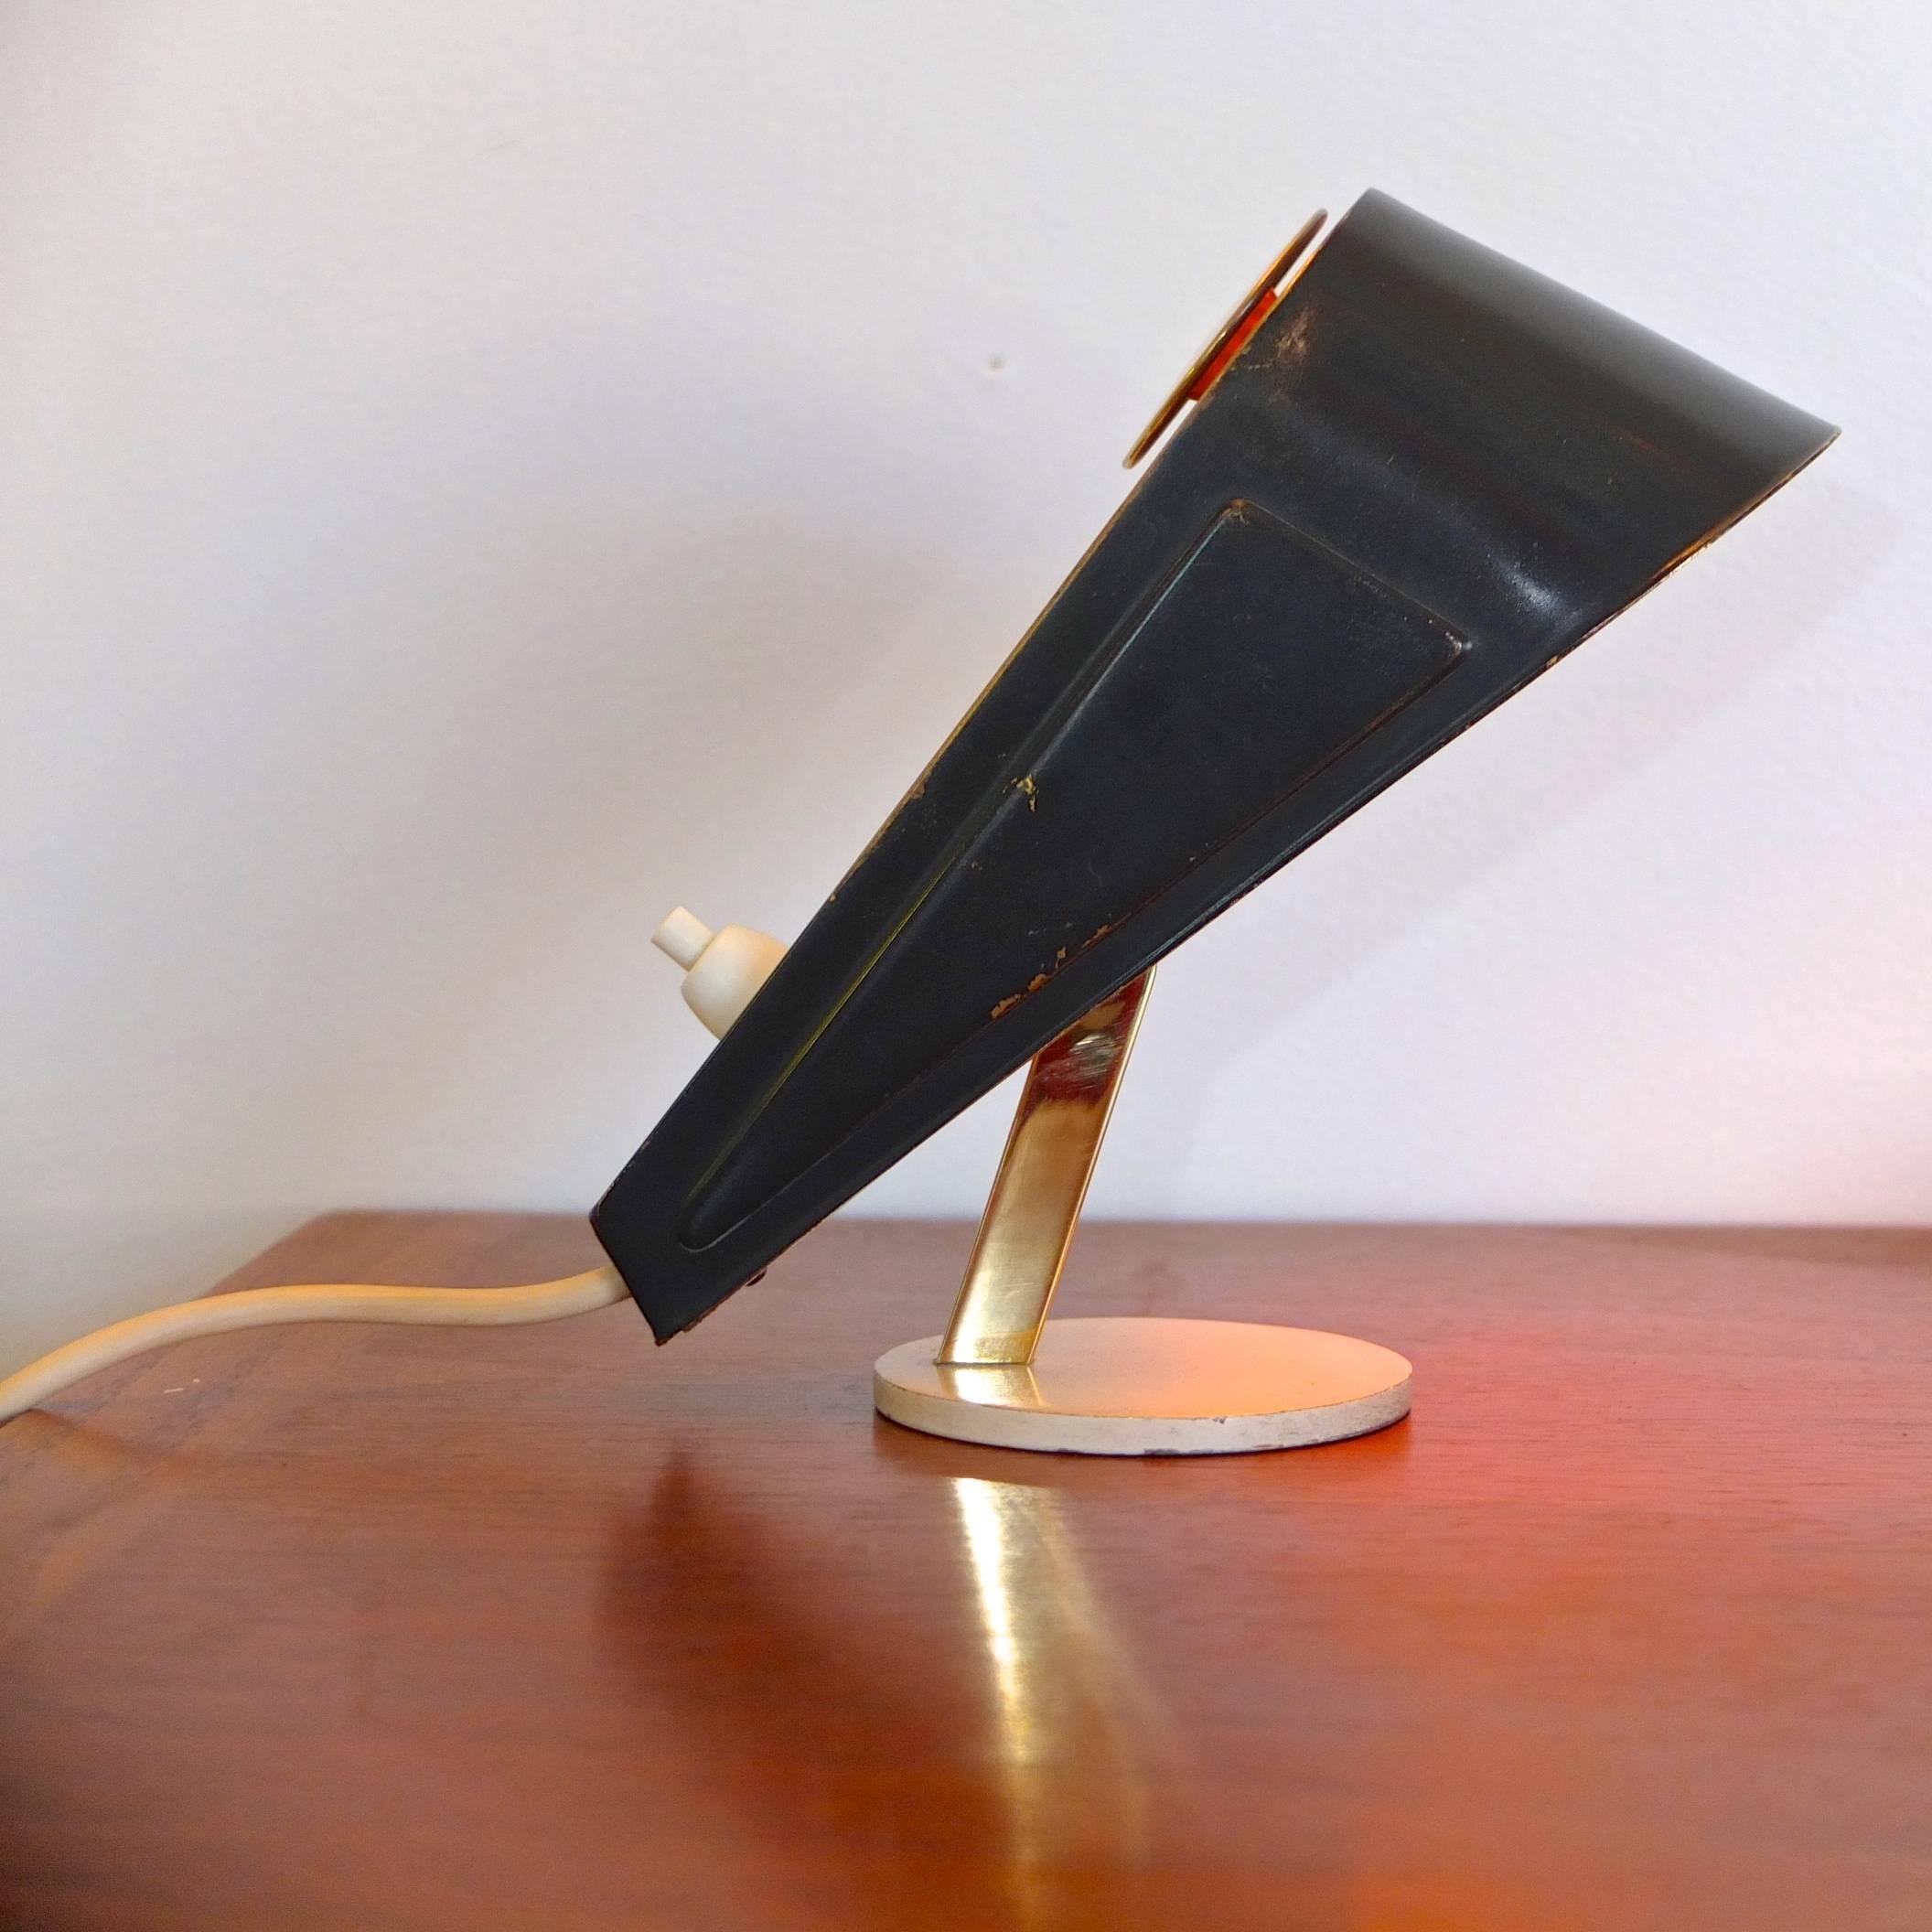 Articulating petite desk lamp in form of a wedge shaped door stopper. Enameled brass shade on brass stem on round enameled metal disk base. Takes one E14 candelabra bulb. Heavy white cord with two pronged European plug (adapter provided). Push